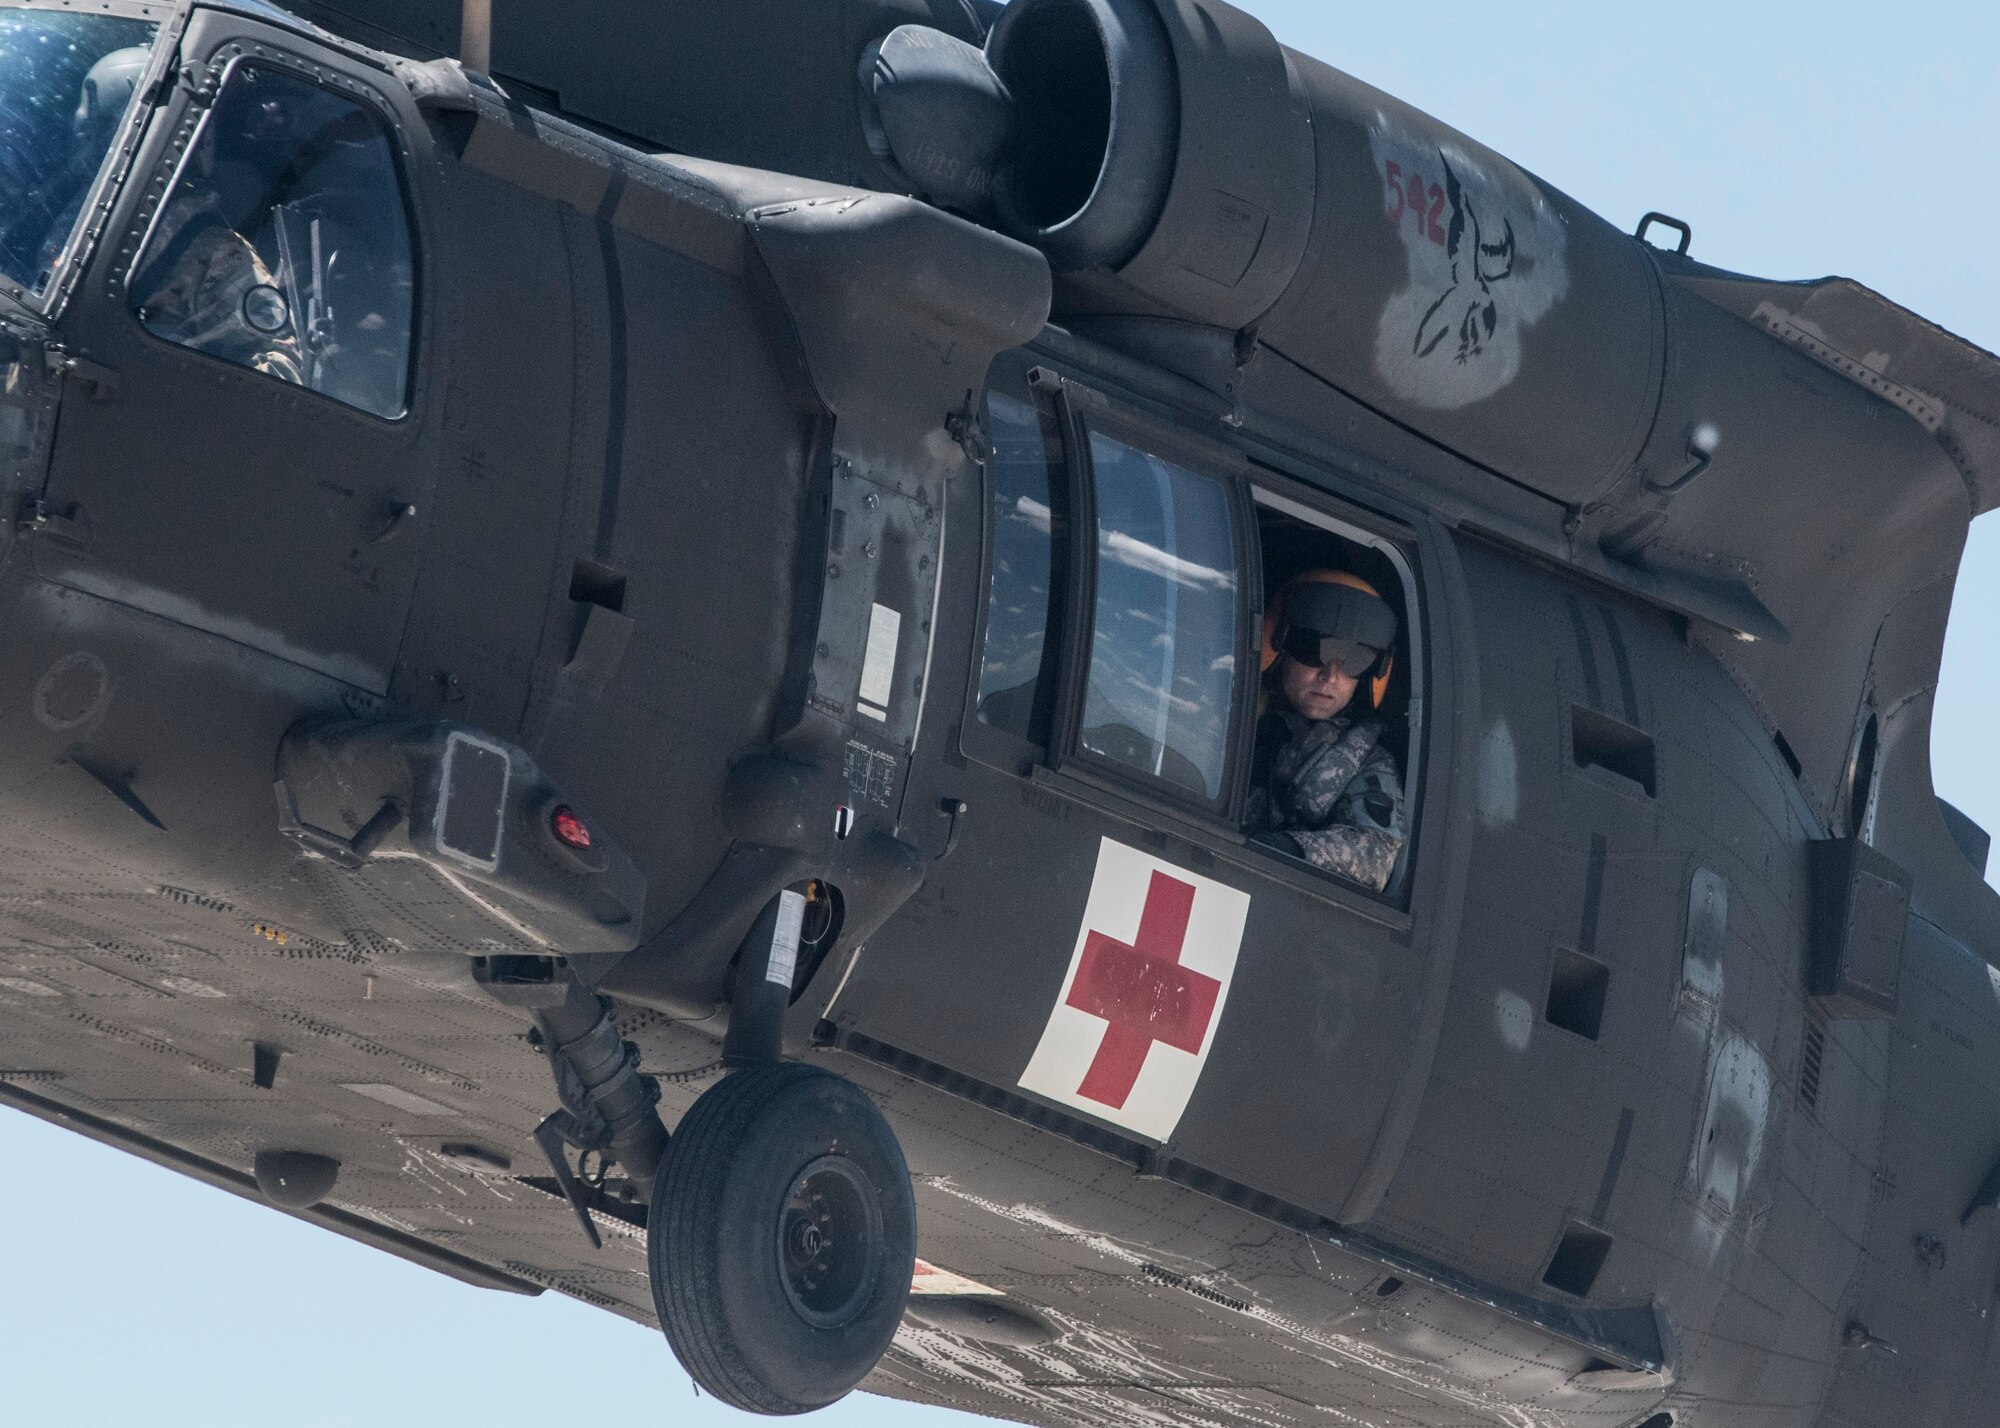 A U.S. Army member of the 6-101st Aviation Regiment from Fort Campbell, Kentucky leans out of the window of a UH-60 Black Hawk during their units first-ever medical water extraction with Survive, Evade, Resist and Escape instructors  Scott Air Force Base at Lake Carlyle, Illinois, June 7, 2017. Lt. Col. Brooke Matson, 375th Operations Support Squadron, Lt. Col. Brandon Dow, 54th Airlift Squadron, and Maj. Madison Basil Jr., Air Mobility Command, received hoist, water survival and flare training to learn how to survive in aqautic situations long enough to be rescued. The 101st Combat Aviation Brigade has served in almost every single military operation since the Vietnam War, including combat, peacekeeping, and humanitarian. By partnering with AMC's SERE instructors, this training allows for joint-service coordination while preparing aerial crew members to survive in austere locations ater being displaced from their aircraft. (U.S.Air Force photo by Airman 1st Class Daniel Garcia)